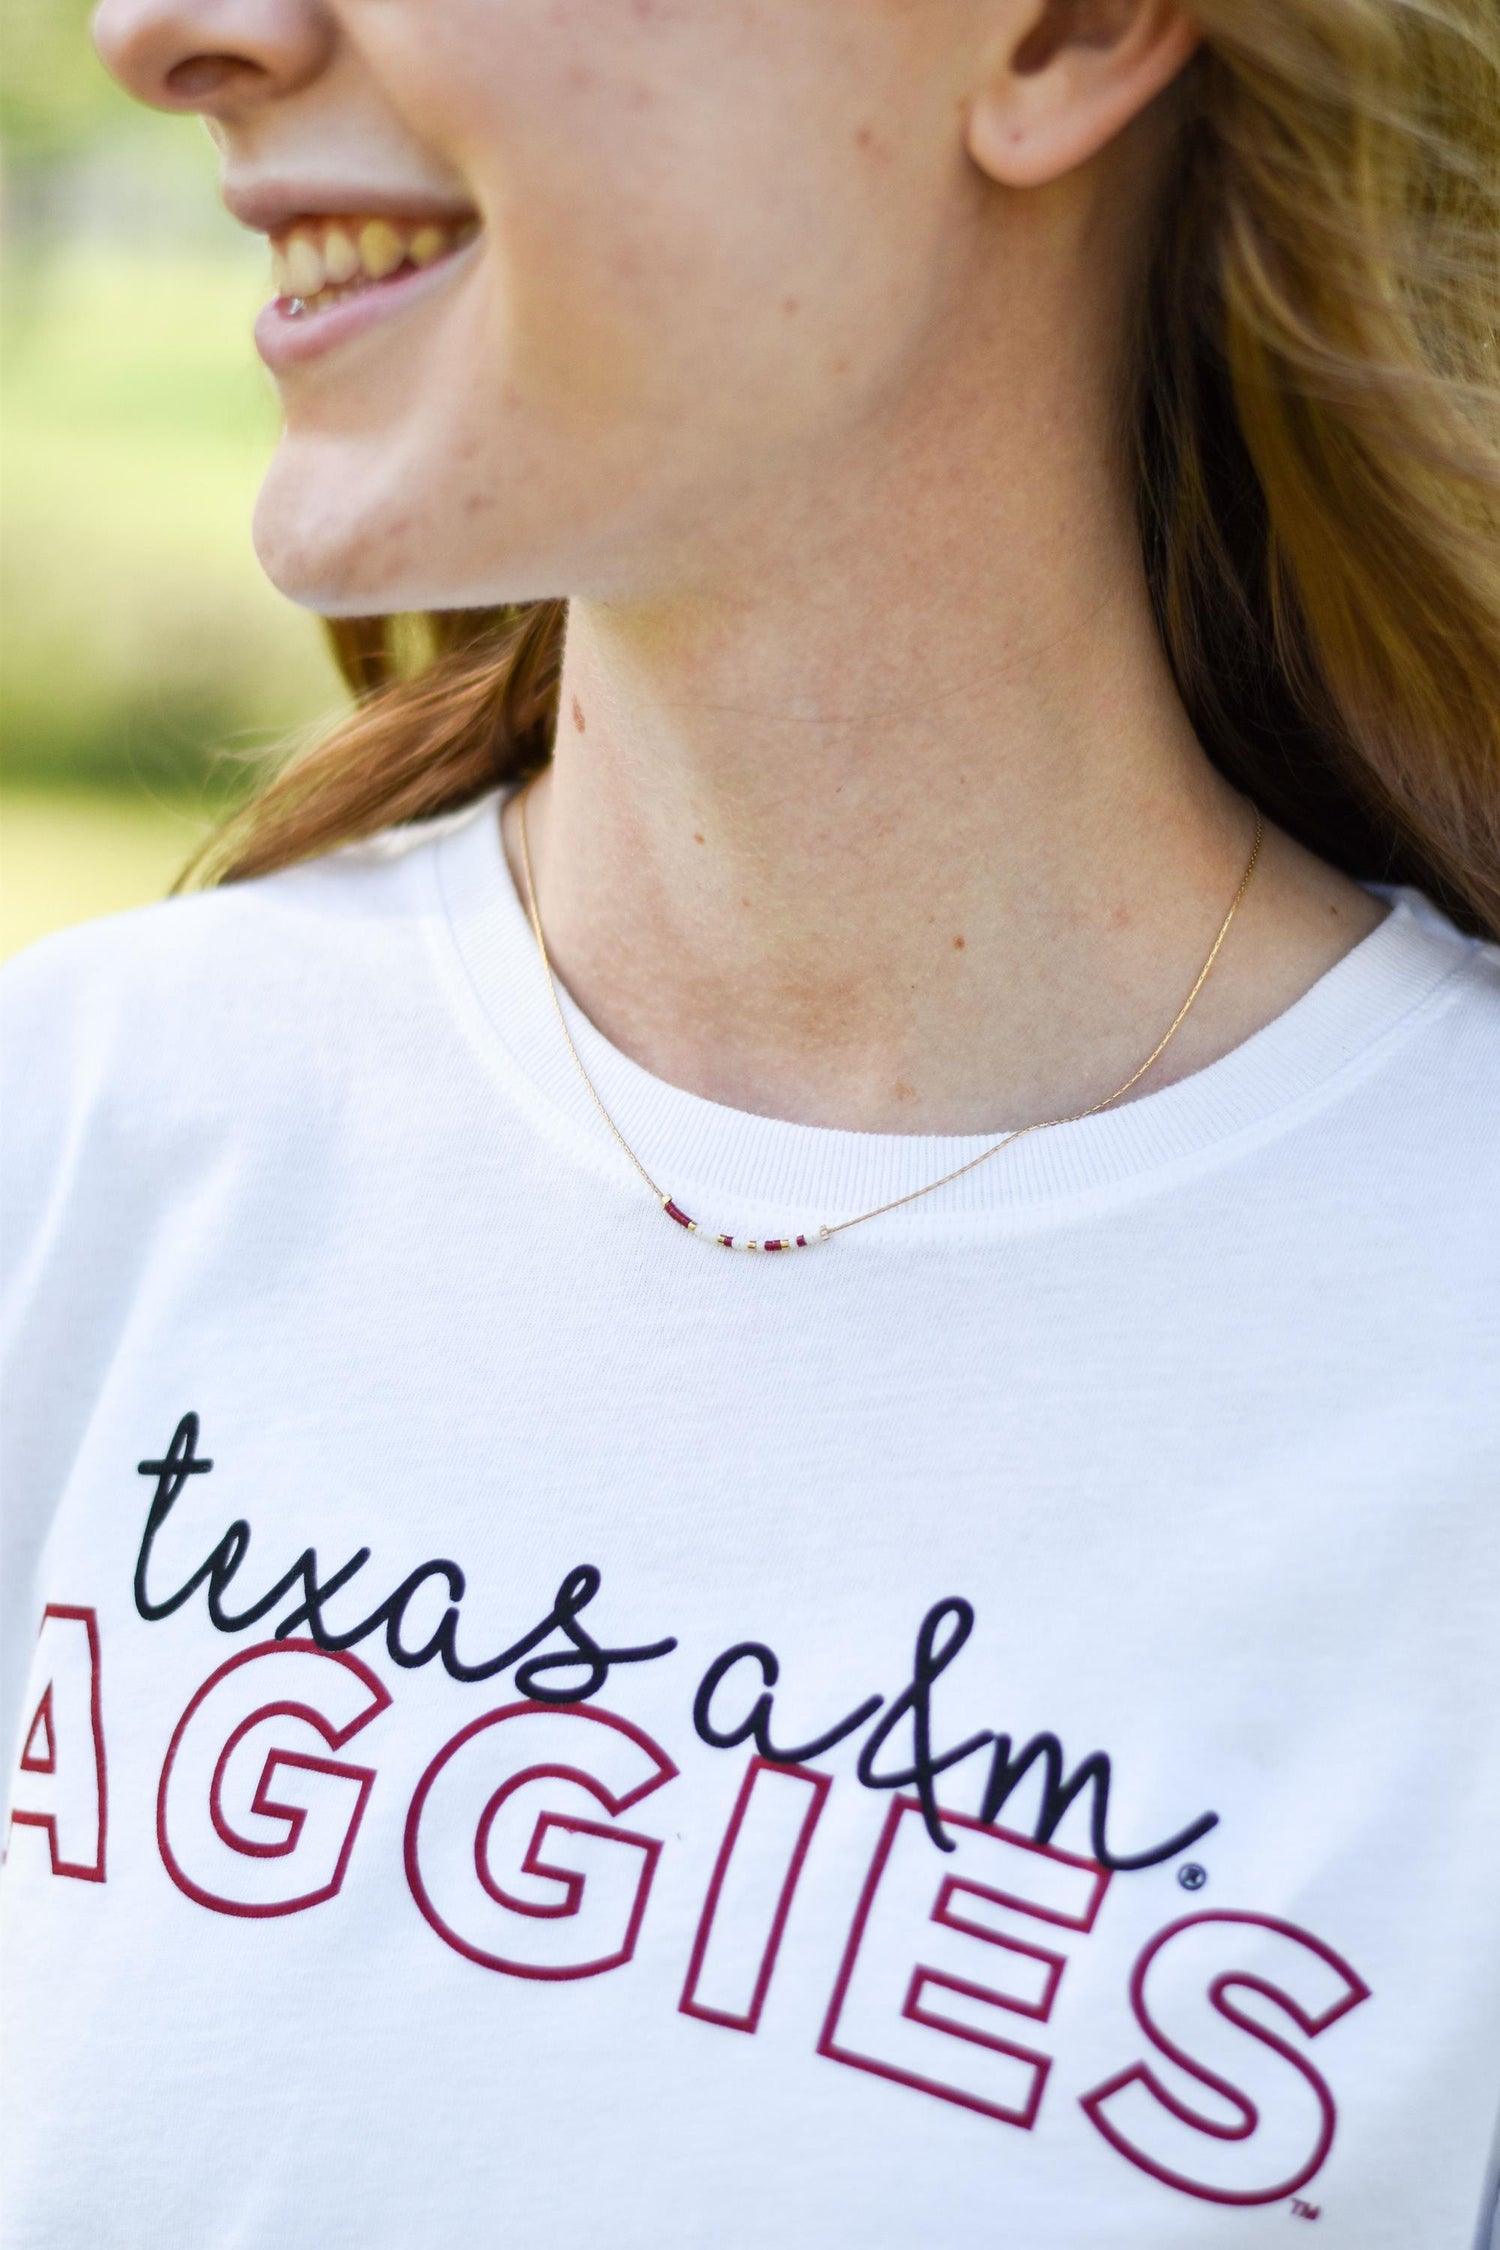 Howdy Morse Code Necklace